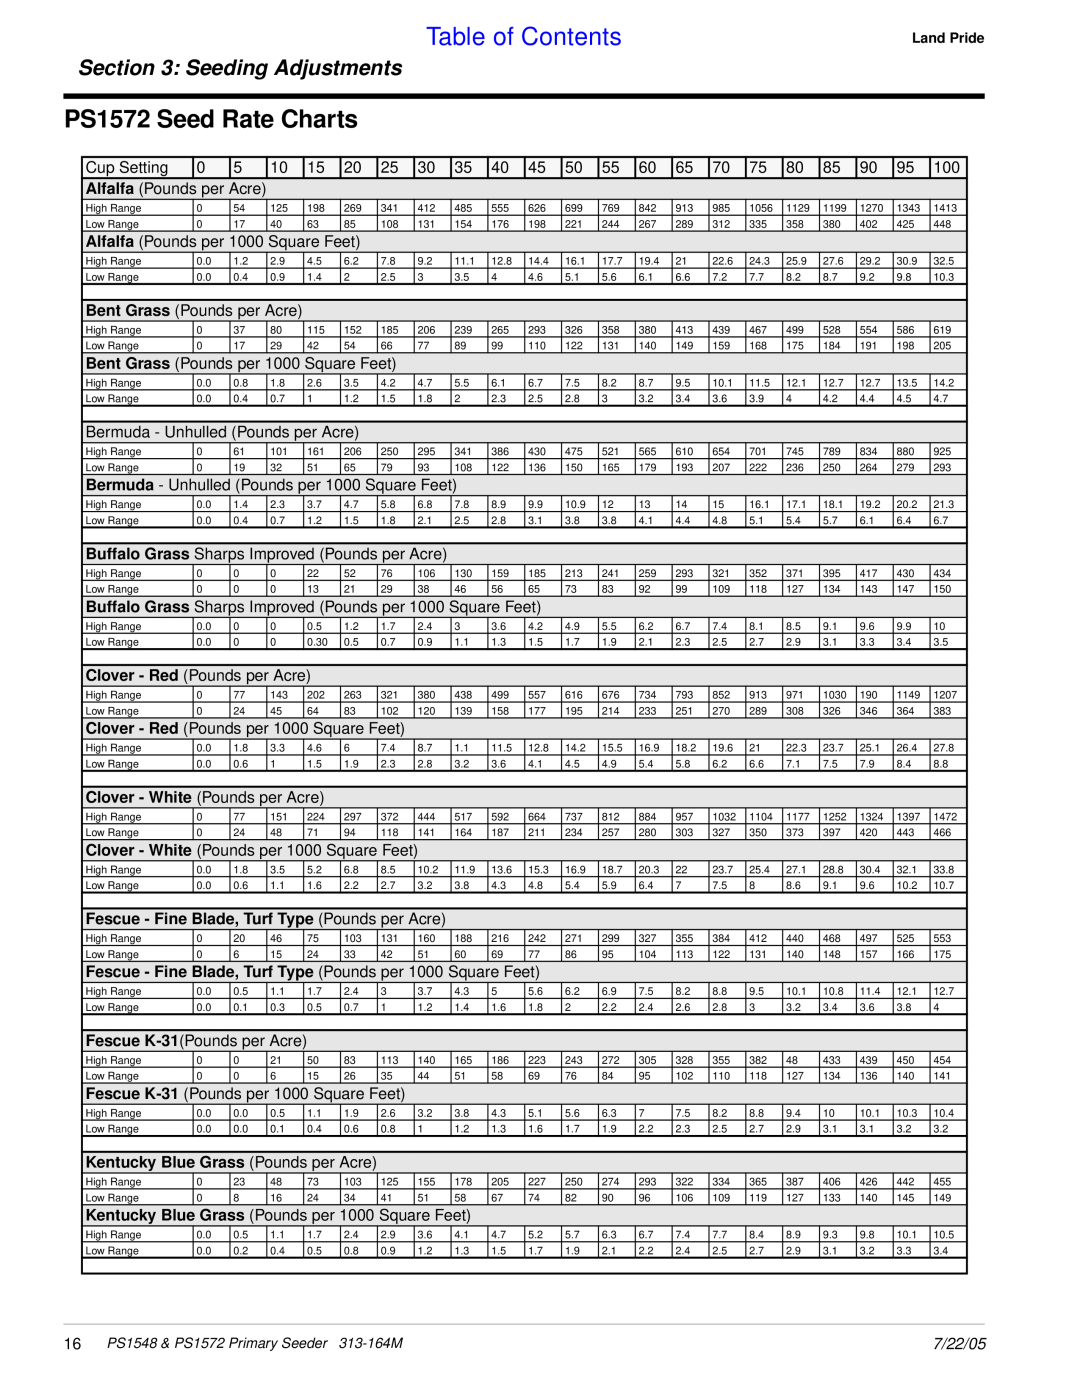 Land Pride PS1548 manual PS1572 Seed Rate Charts, Table of Contents, Seeding Adjustments, 7/22/05 